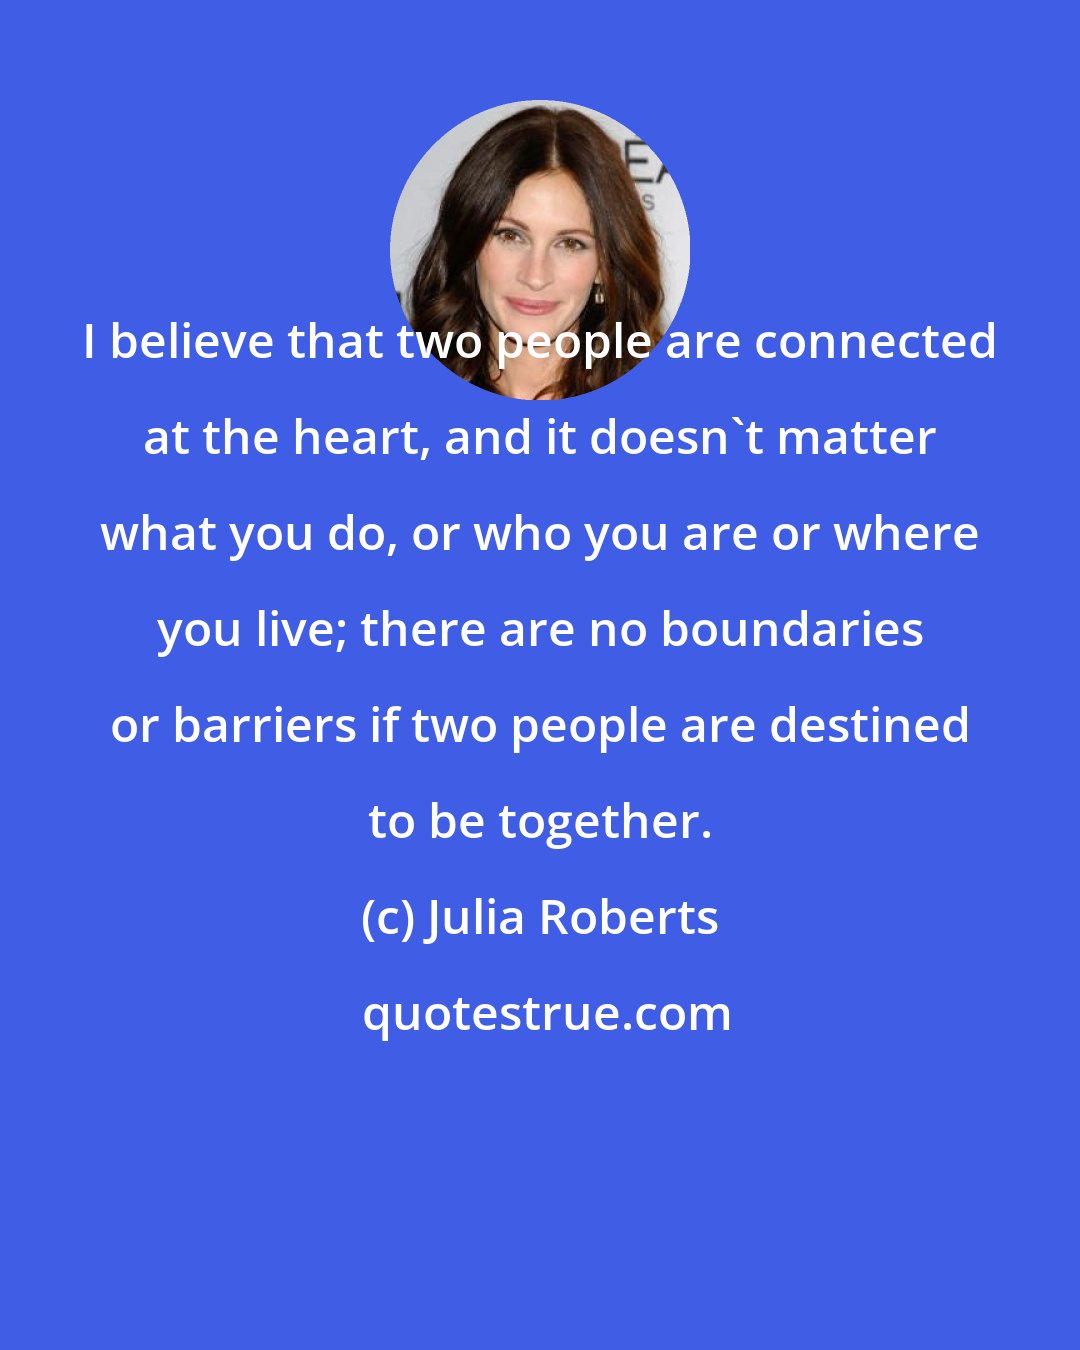 Julia Roberts: I believe that two people are connected at the heart, and it doesn't matter what you do, or who you are or where you live; there are no boundaries or barriers if two people are destined to be together.